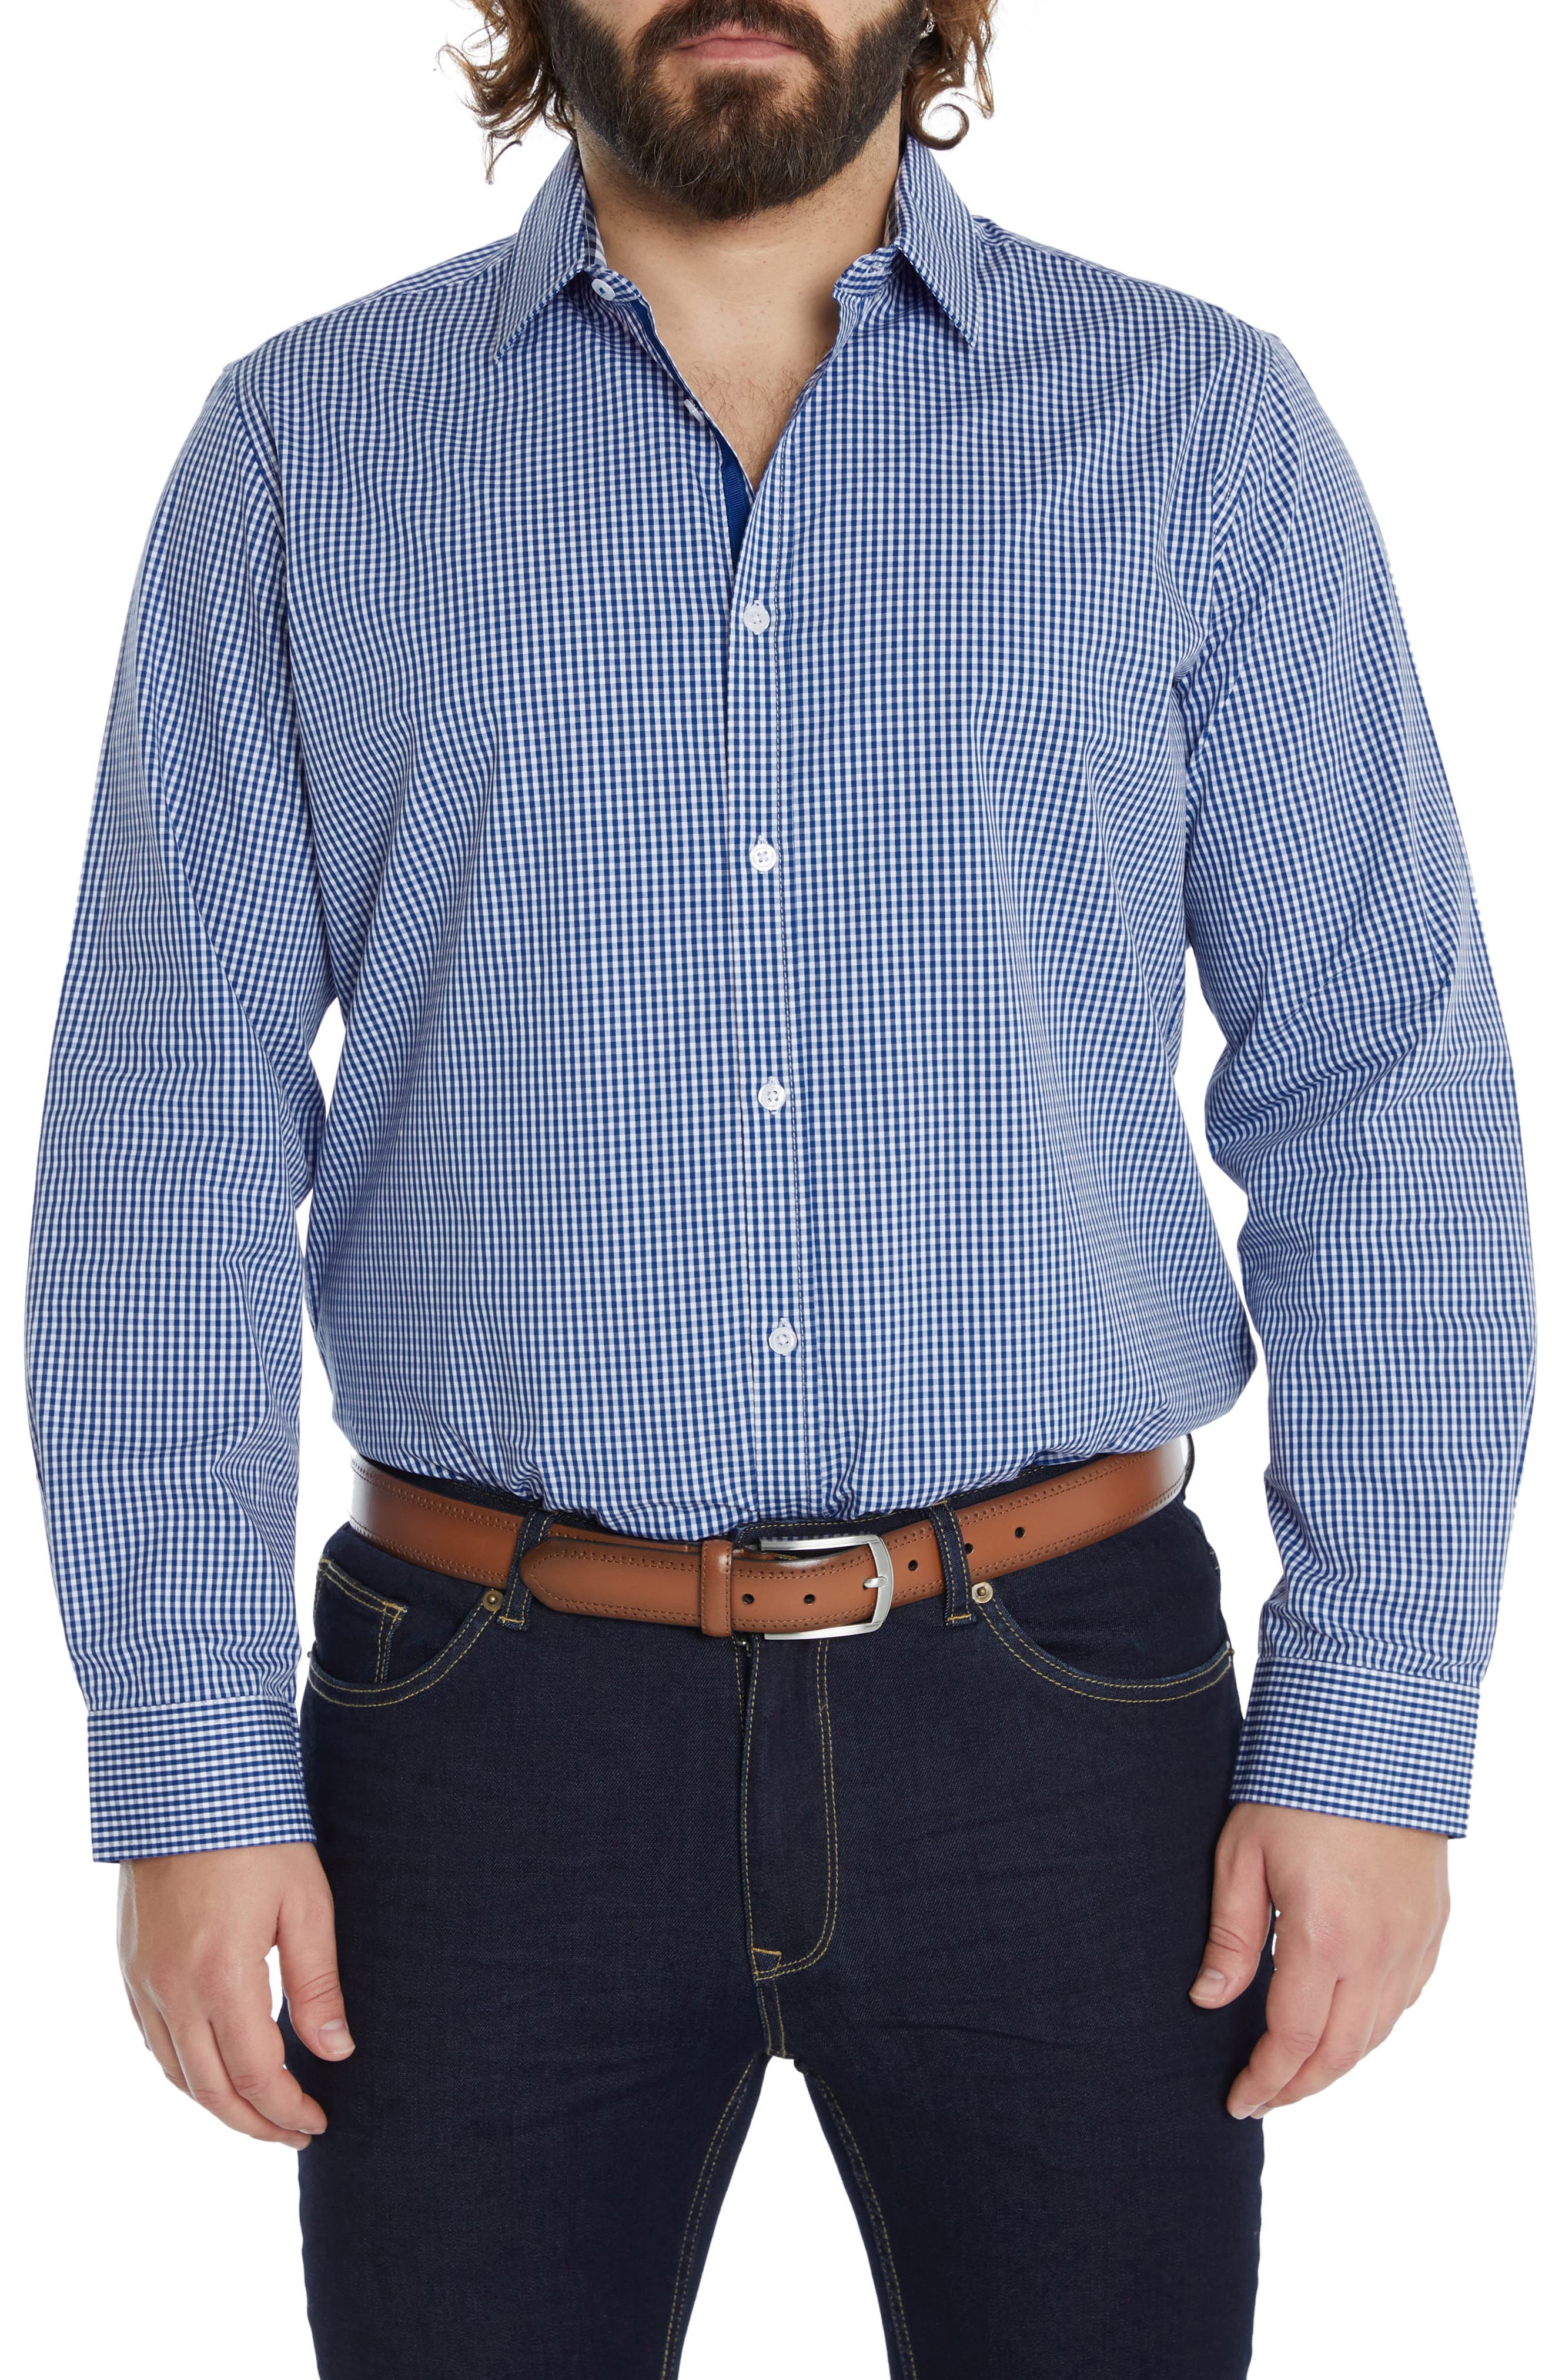 Johnny Bigg Dune Check Cotton Blend Button-Up Shirt in Blu at Nordstrom